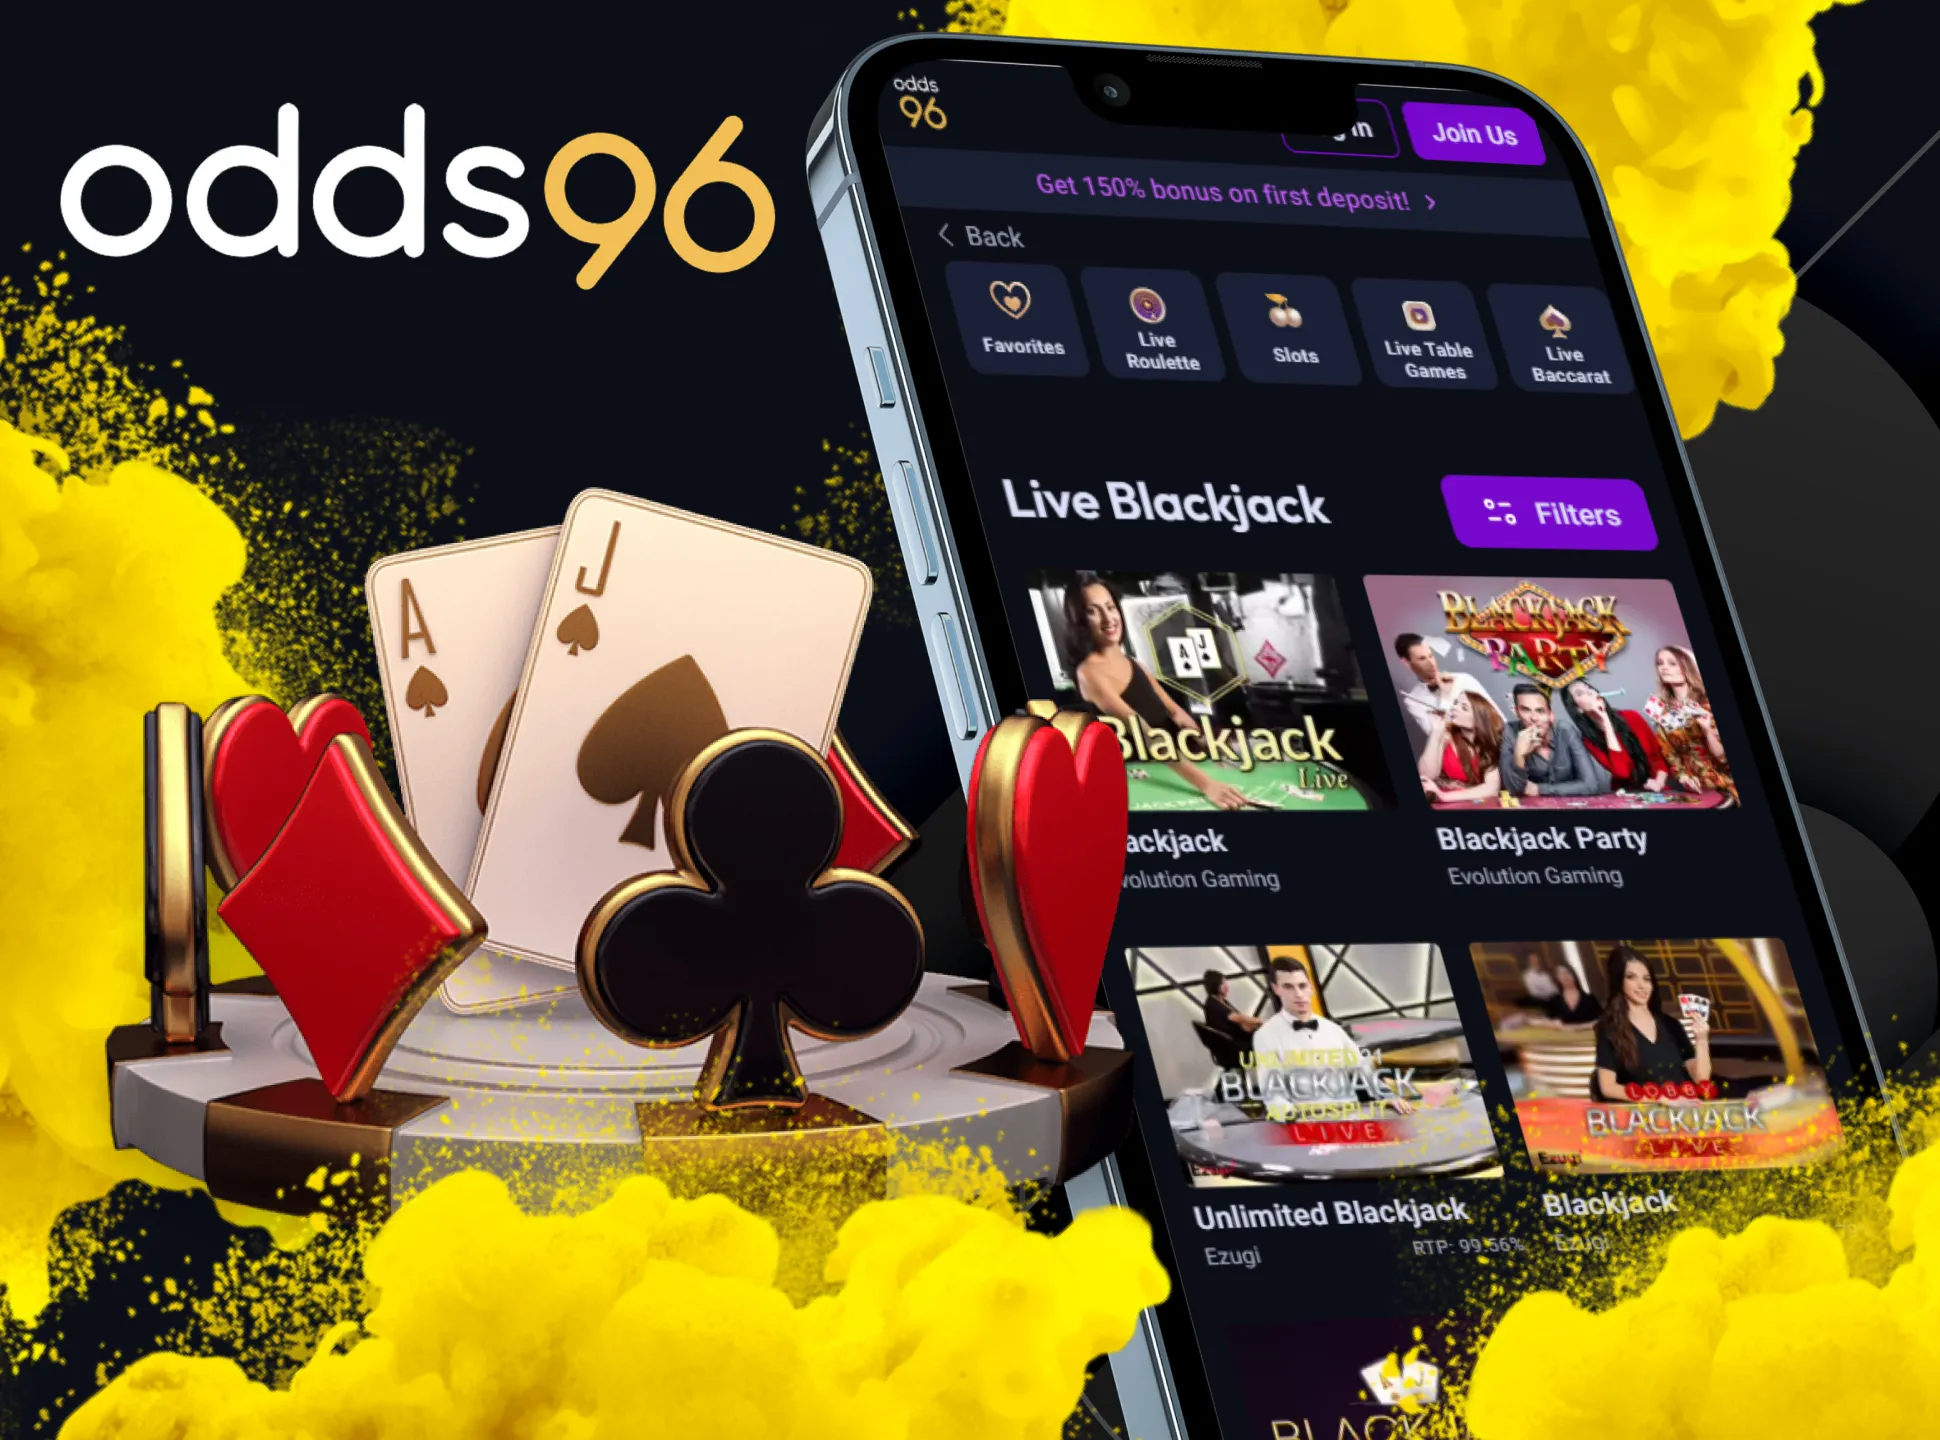 Play blackjack with real people at Odds96.